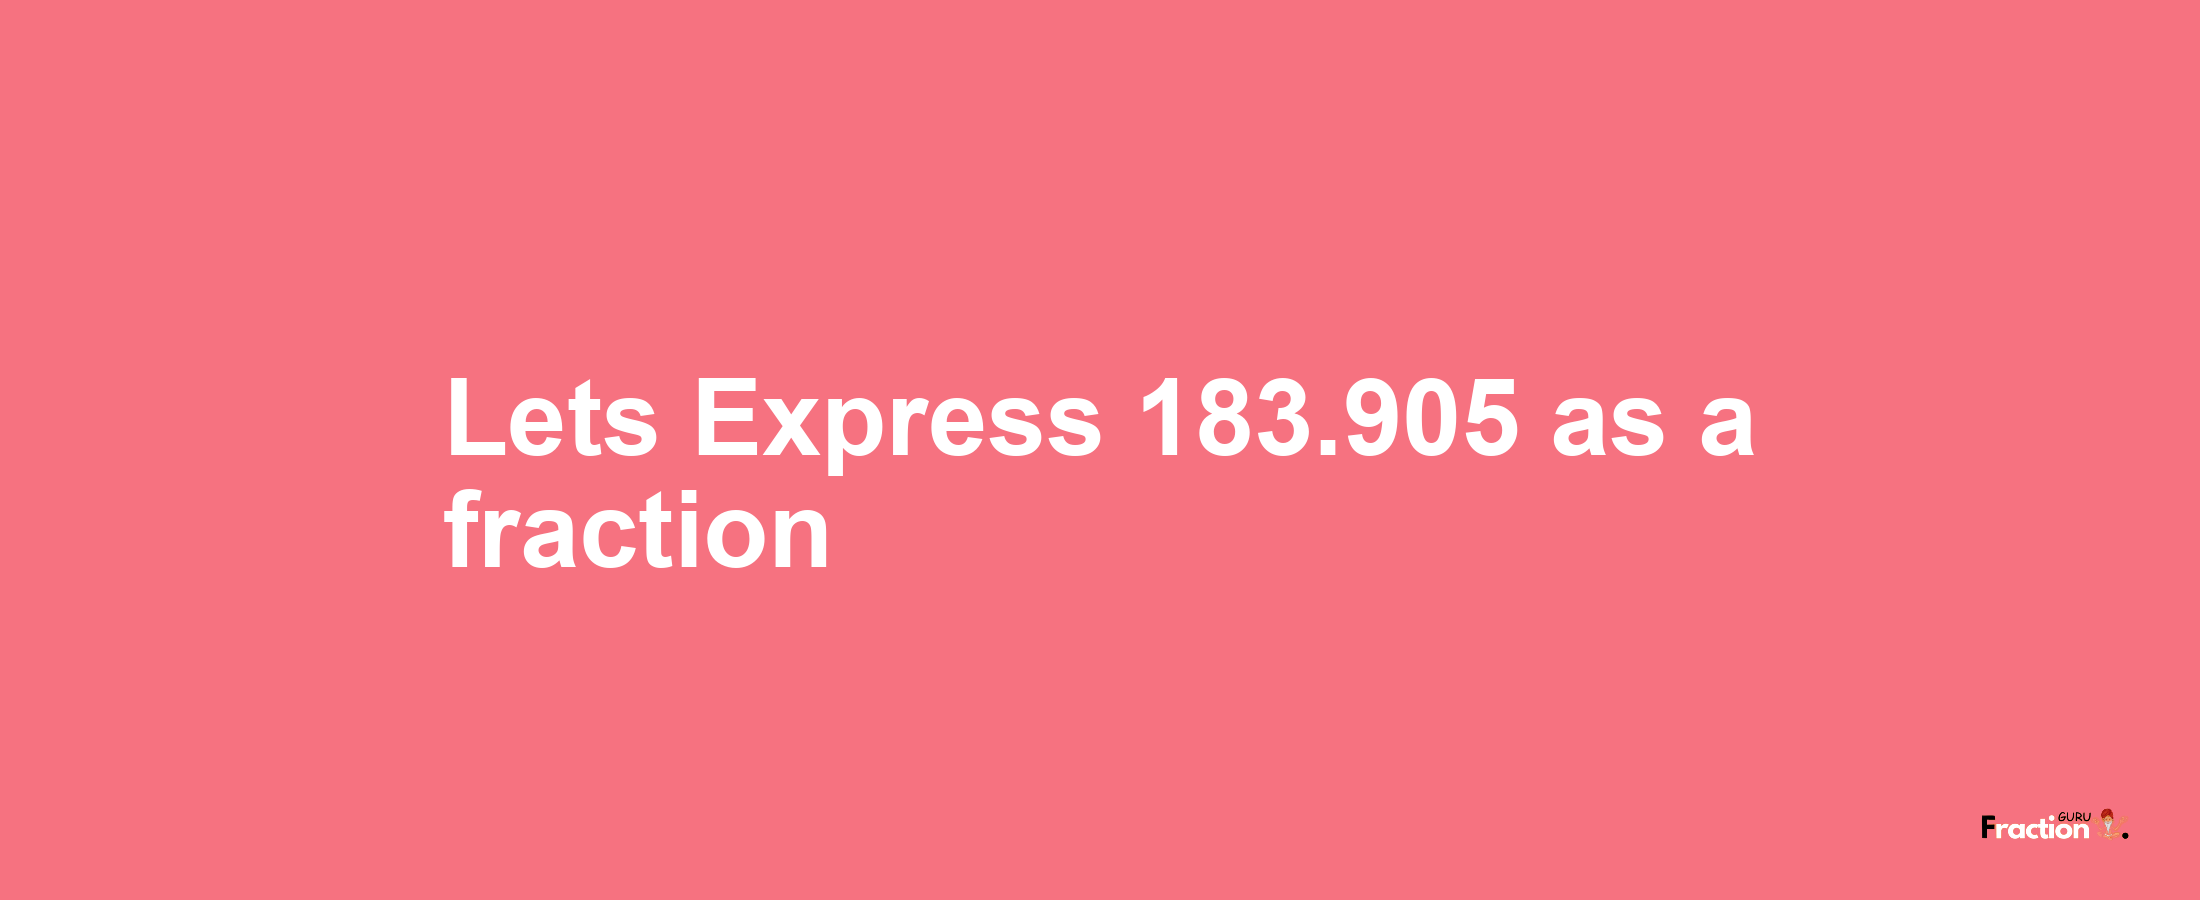 Lets Express 183.905 as afraction